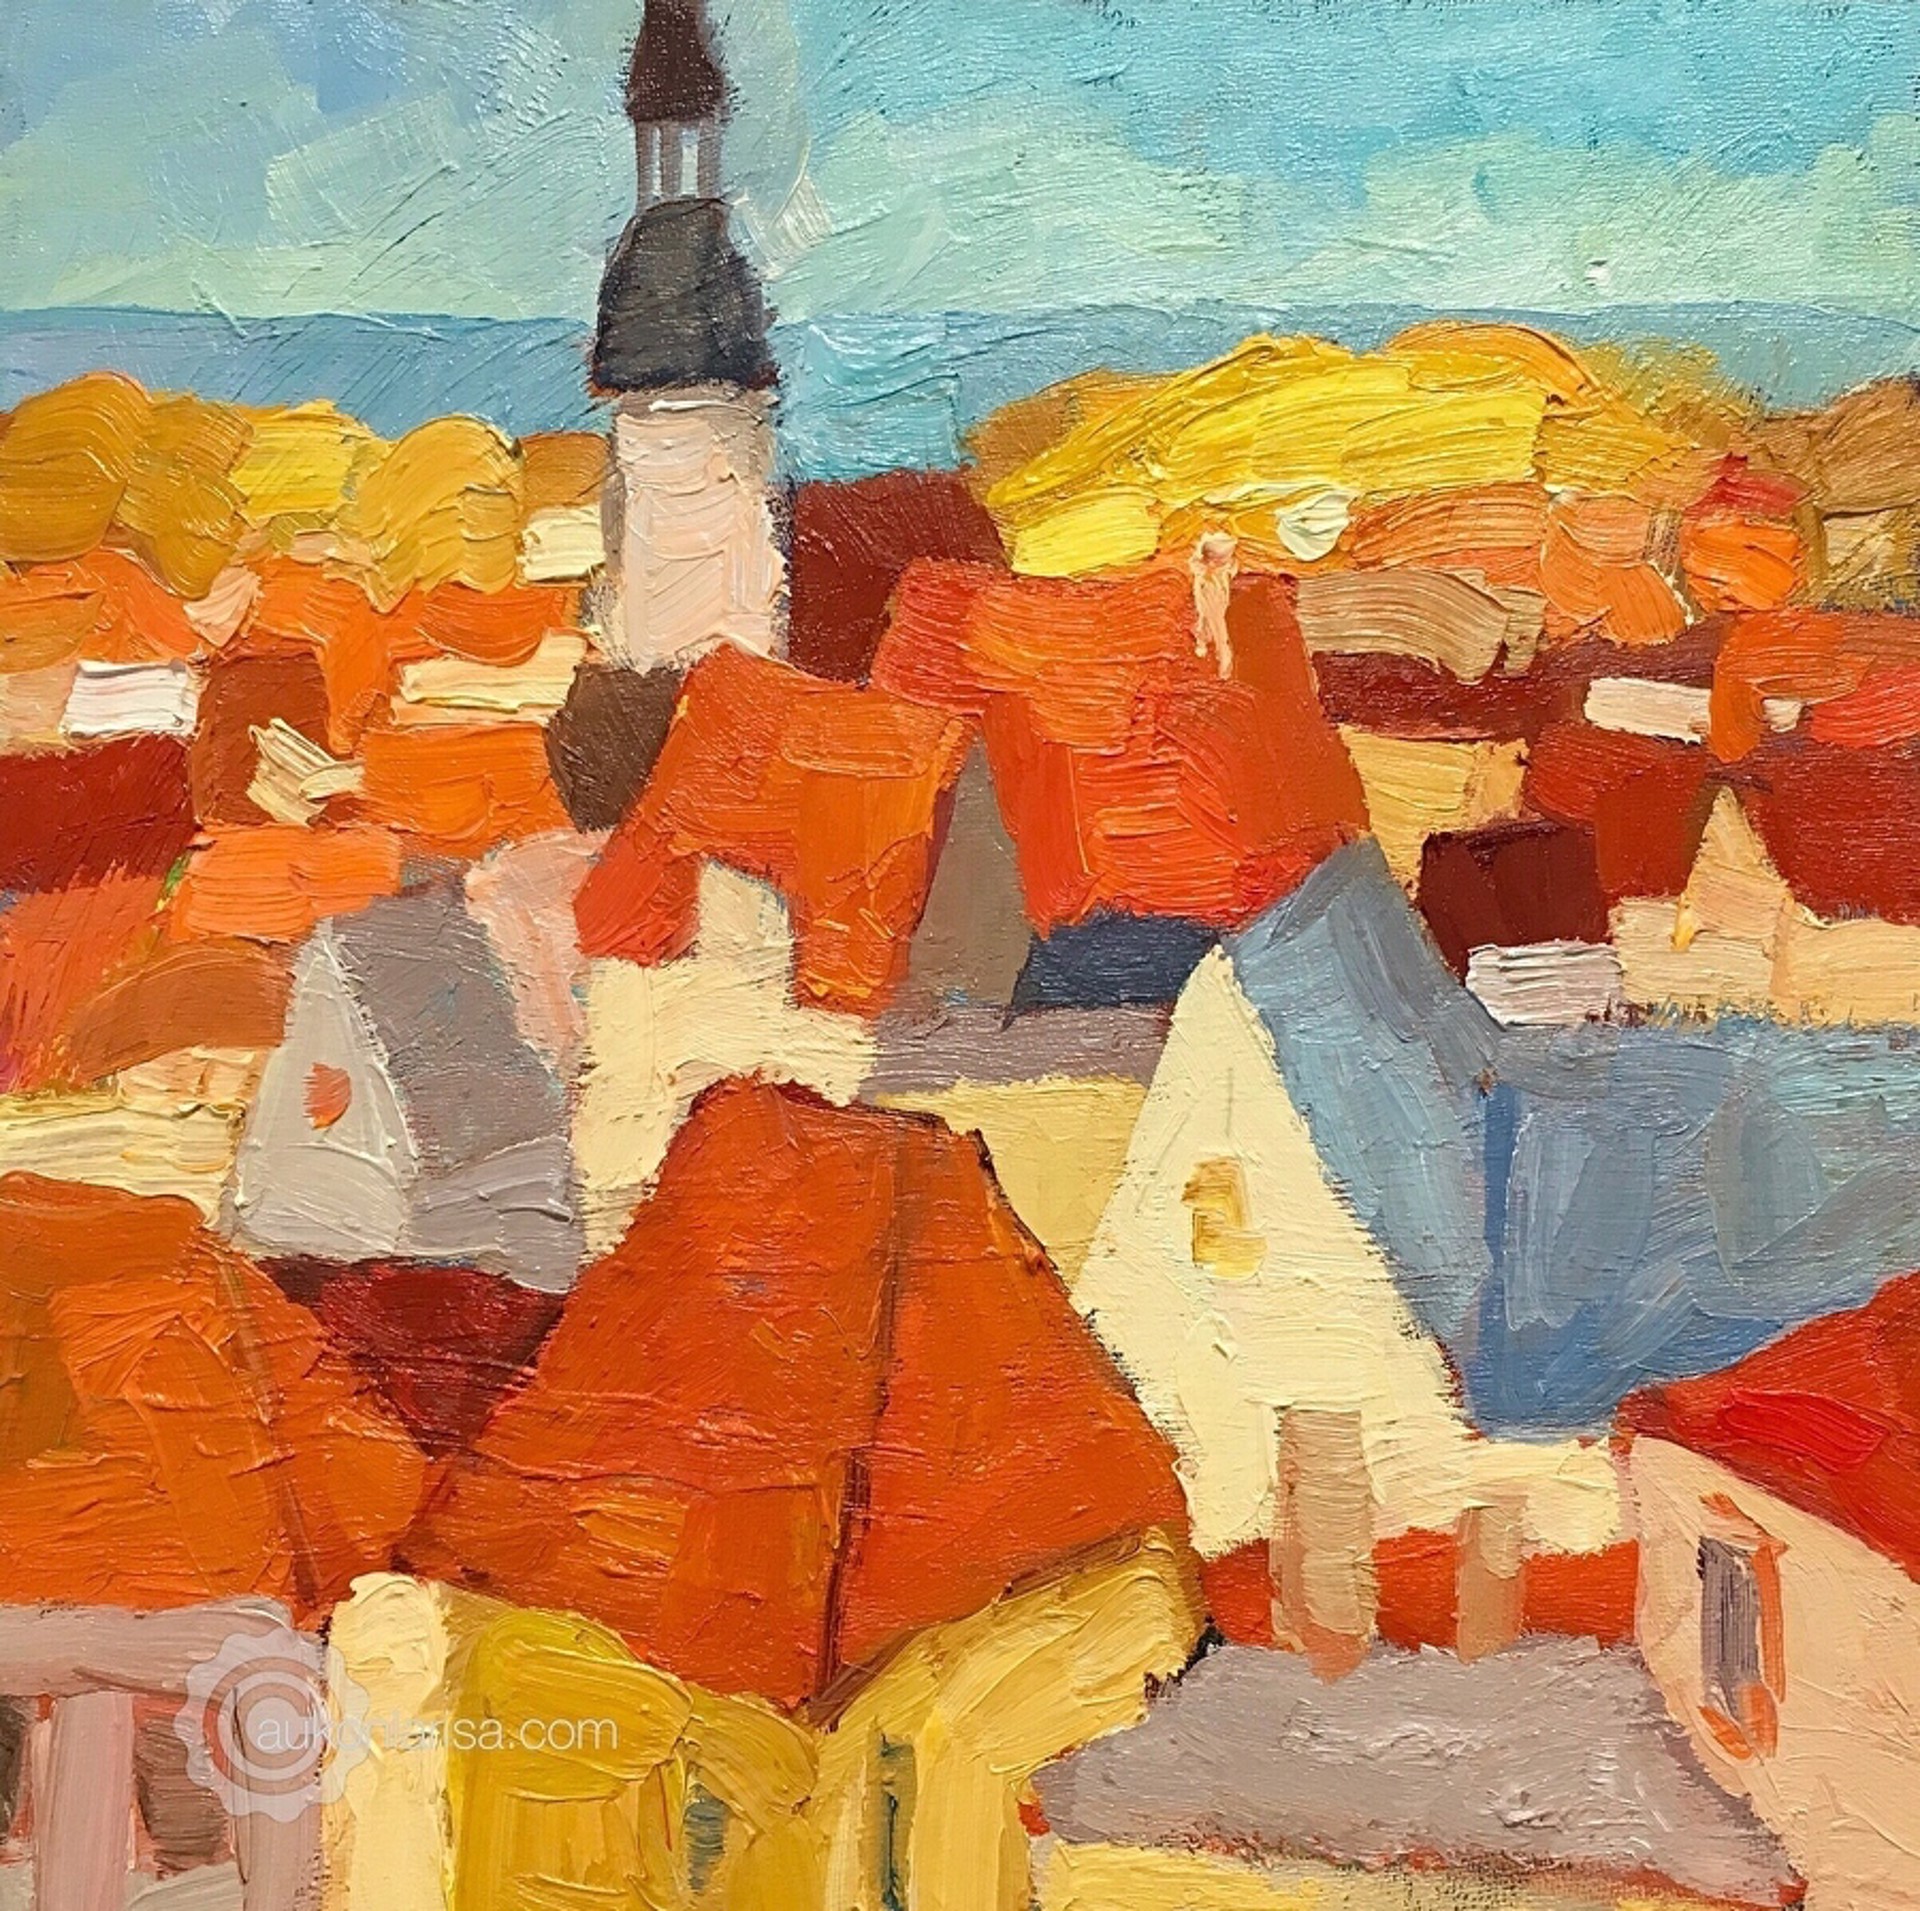 From the Top by Larisa Aukon